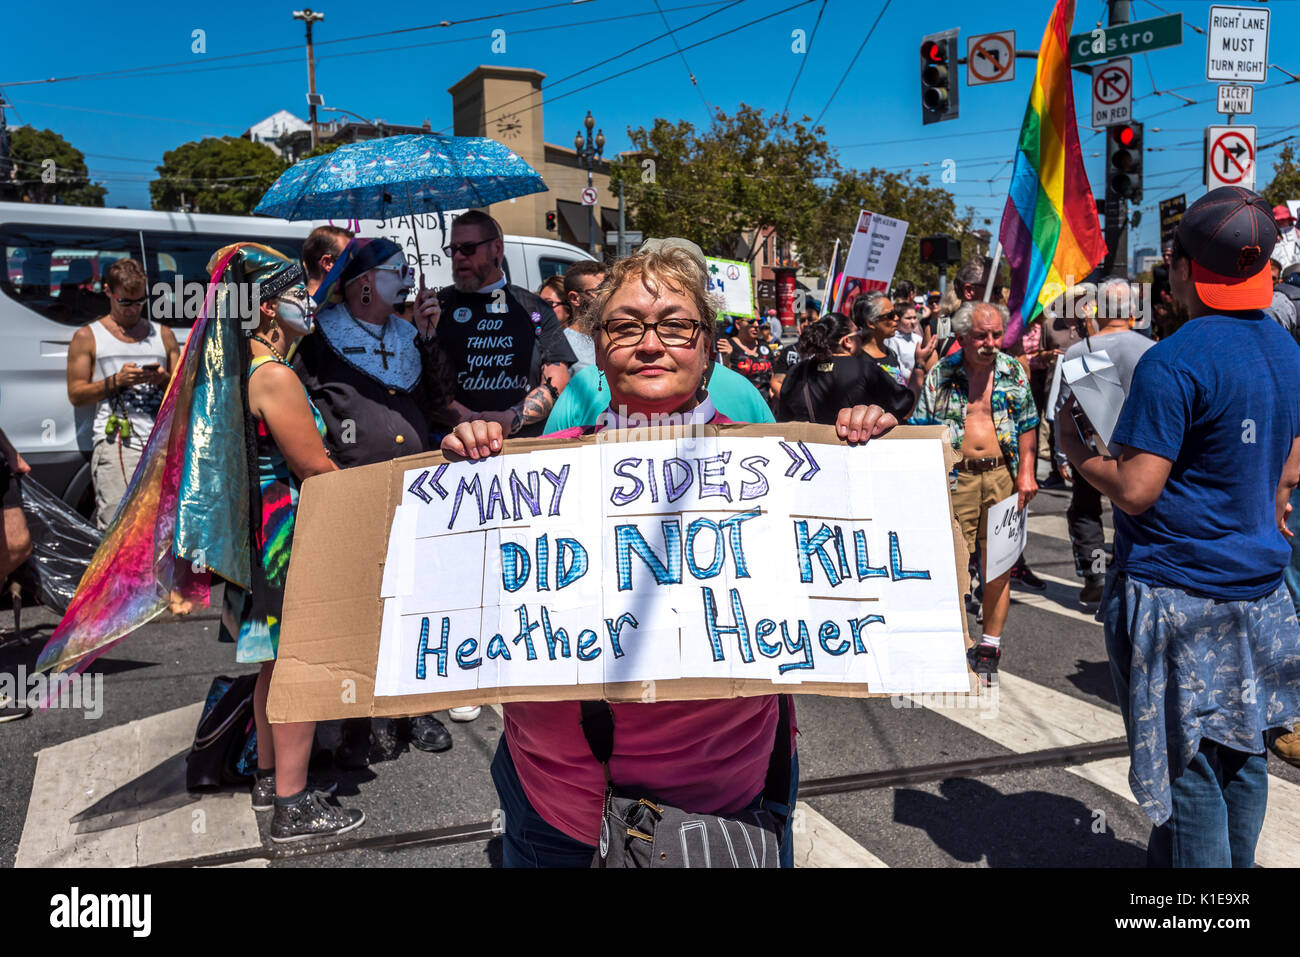 San Francisco, USA. 26th August, 2017, the No Hate rally and protest march in San Francisco. A woman protester holds a sign reading 'Many sides did NOT kill Heather Heyer.' The protesters gathered at Harvey Milk Plaza in San Francisco's Castro district for a rally before marching down Market Street to San Francisco City Hall. Originally planned as one of several counter protests to a previously planned demonstration by far right 'Patriot Prayer' group, which was cancelled the evening before. Credit: Shelly Rivoli/Alamy Live News Stock Photo